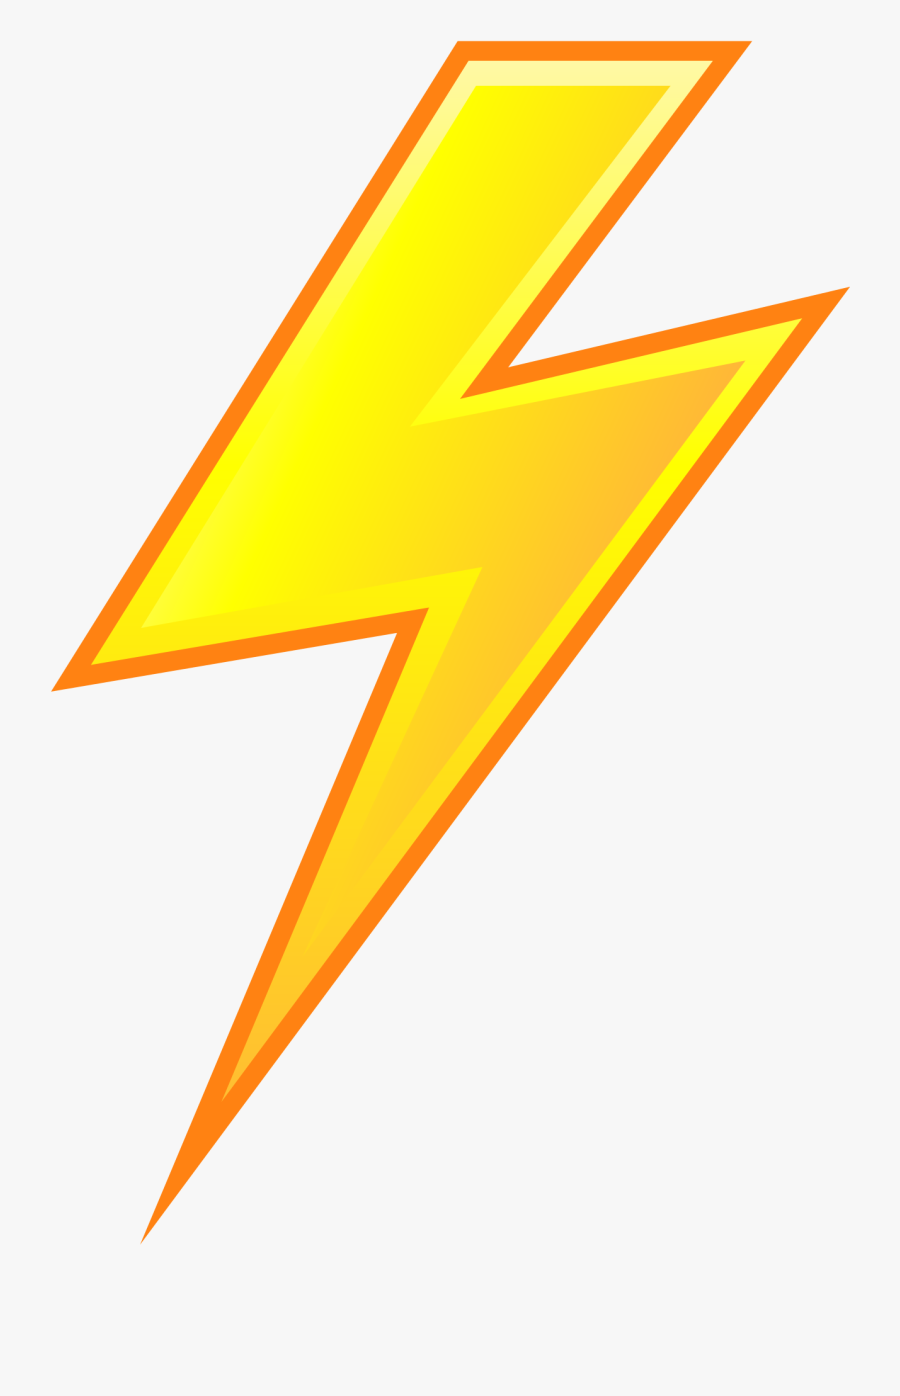 Electricity Clipart Lightning Strike - Triangle, Transparent Clipart